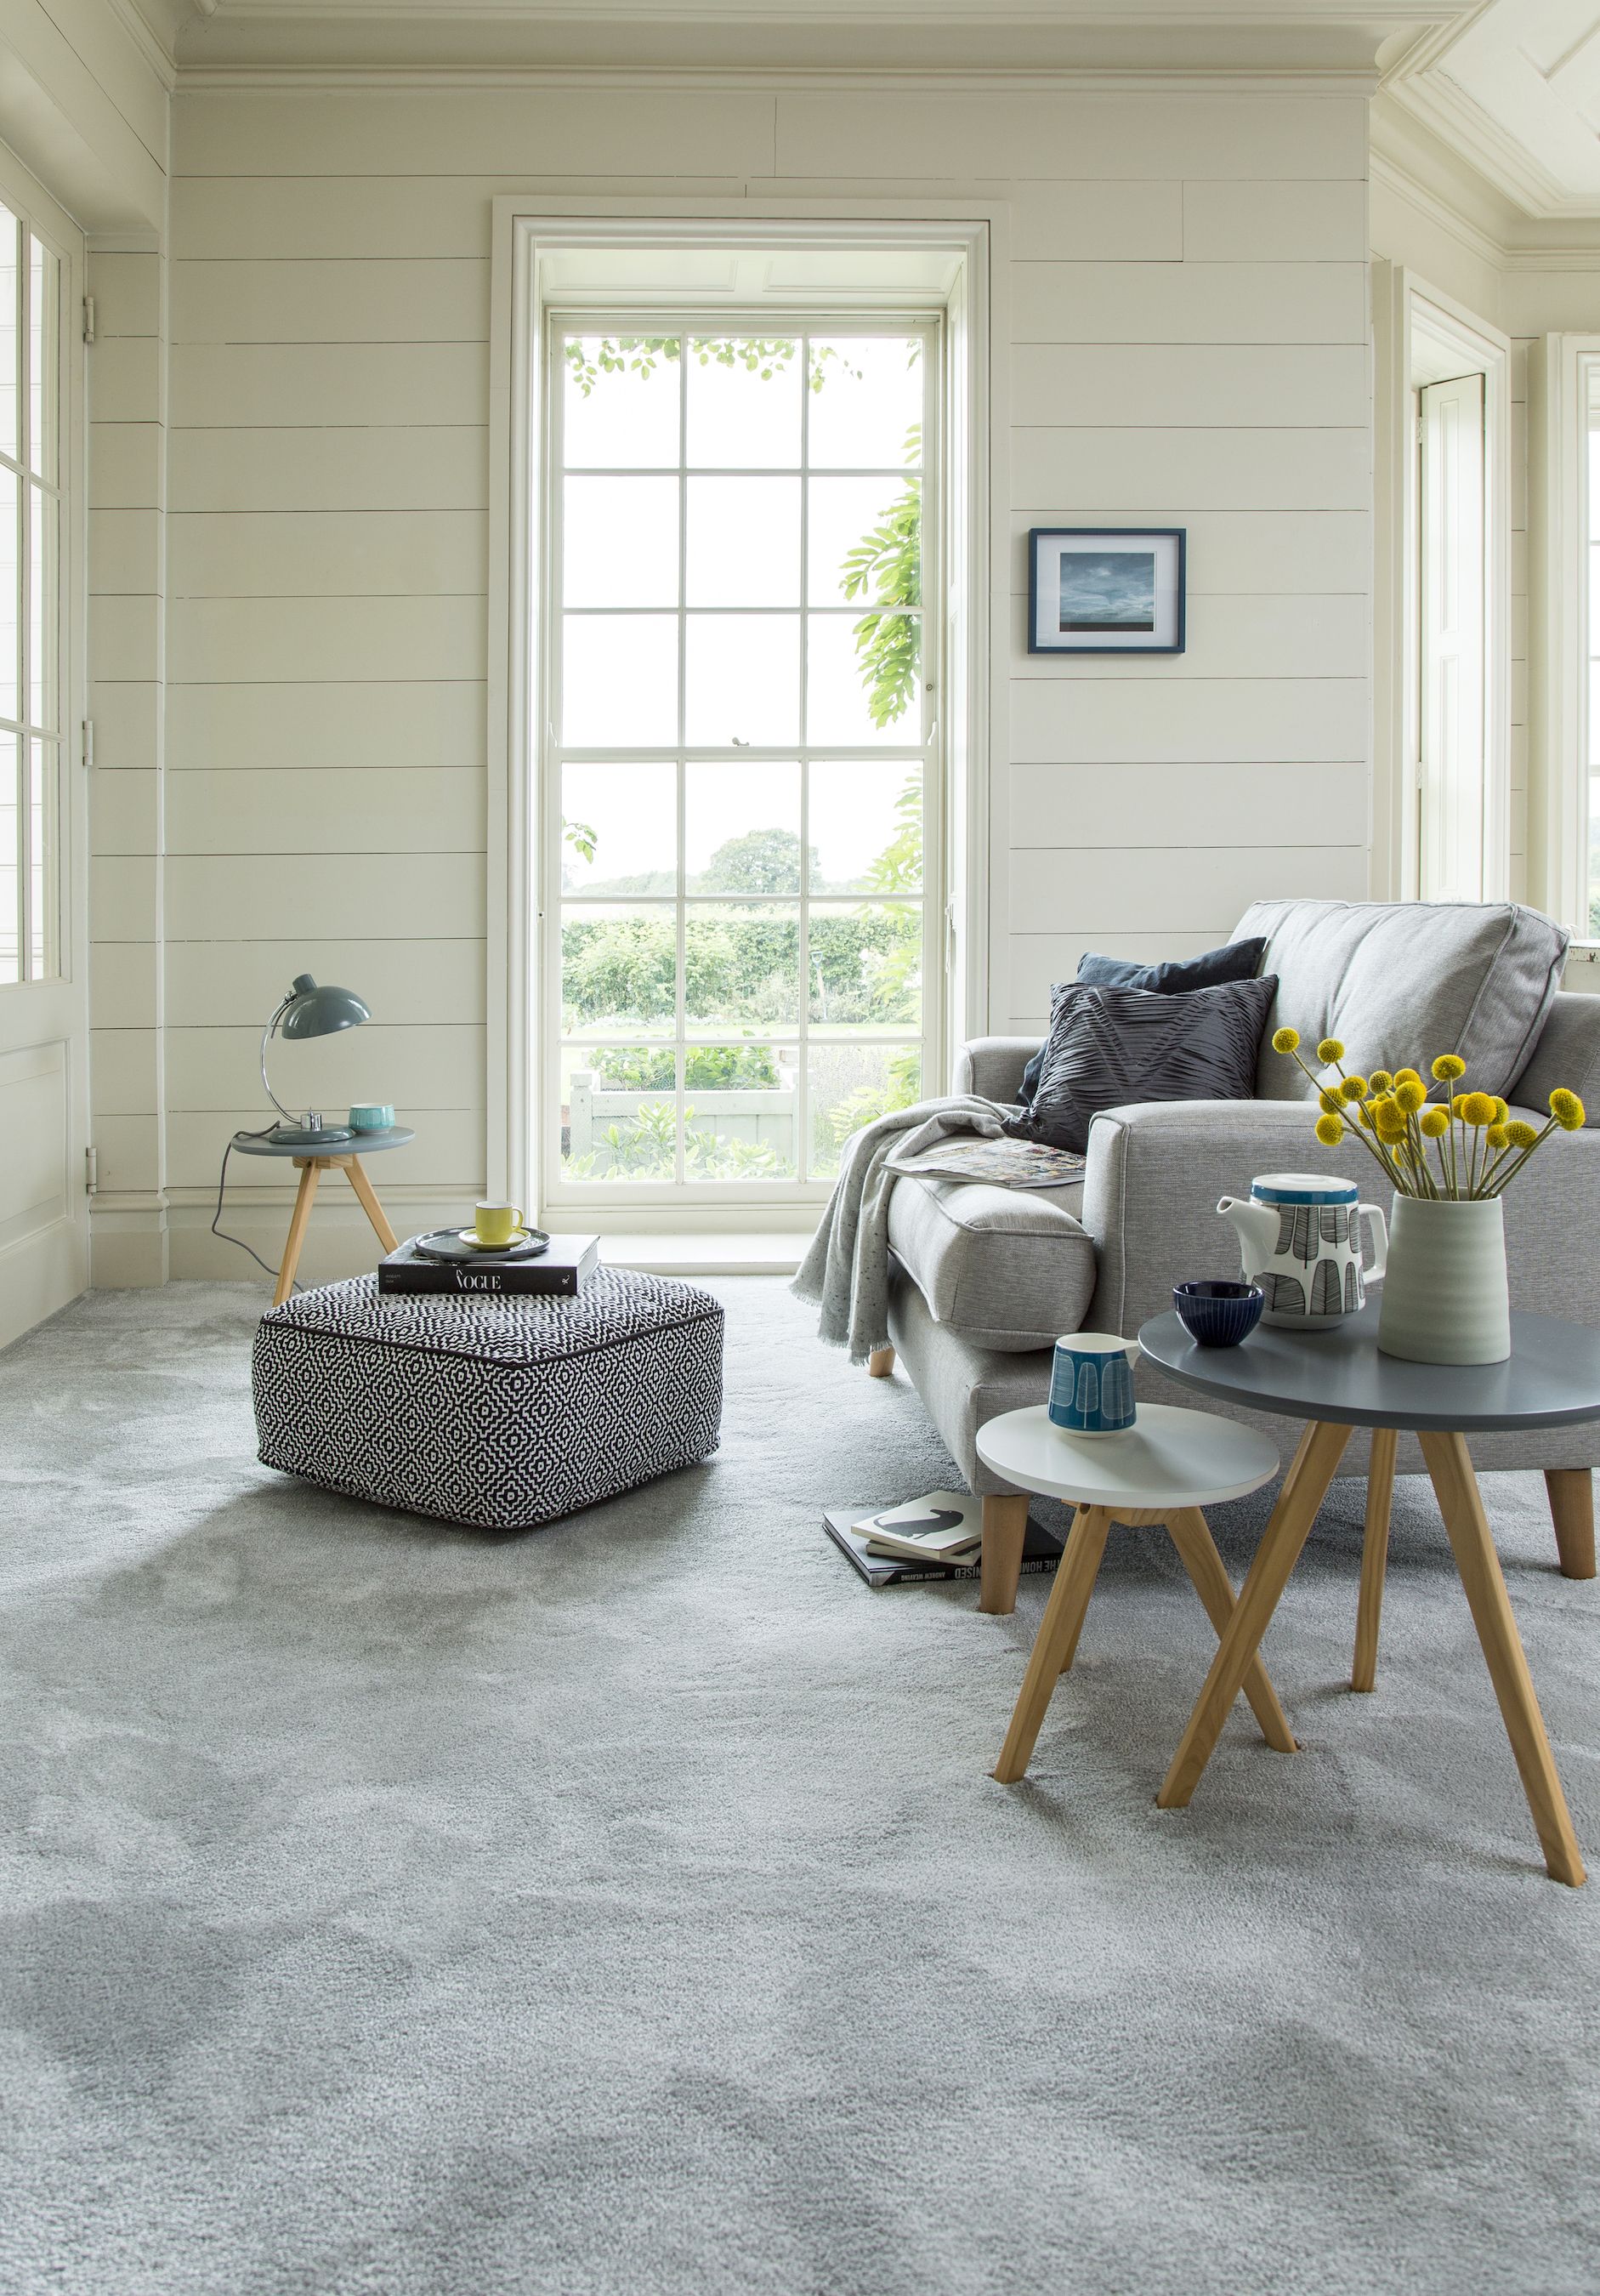 19 Grey Living Room Ideas, What Color Rug For Small Living Room